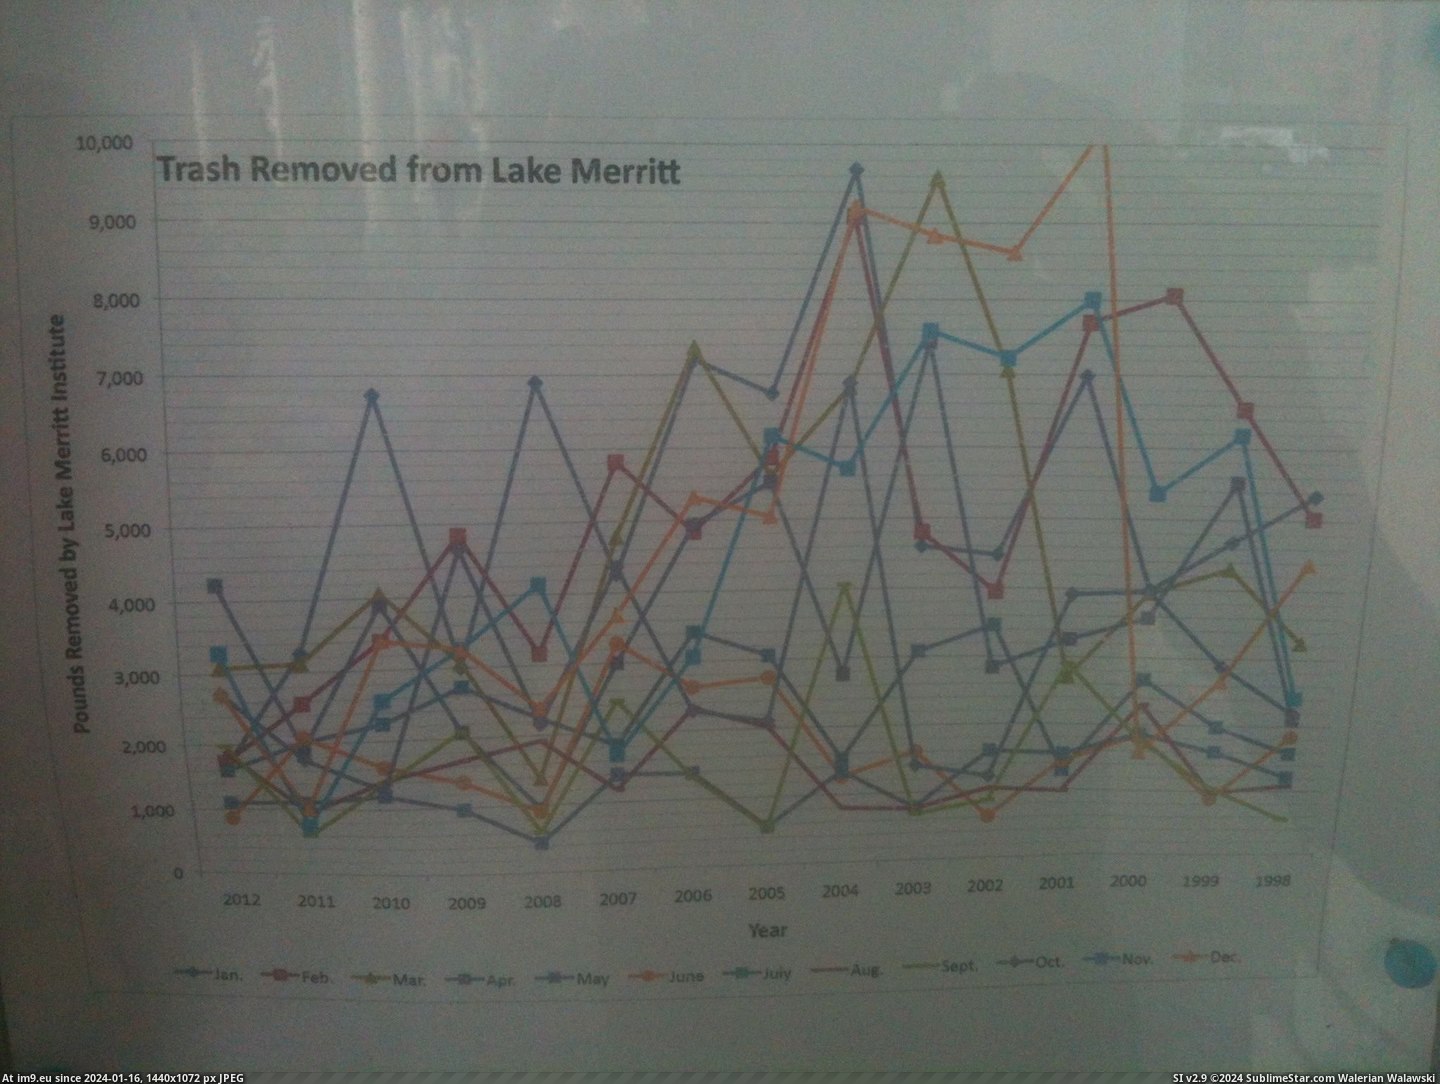 #Lake #Chart #Improved #Merritt #Removed #Trash [Dataisbeautiful] [OC] I improved a chart: “Trash Removed from Lake Merritt”—before and after 2 Pic. (Image of album My r/DATAISBEAUTIFUL favs))